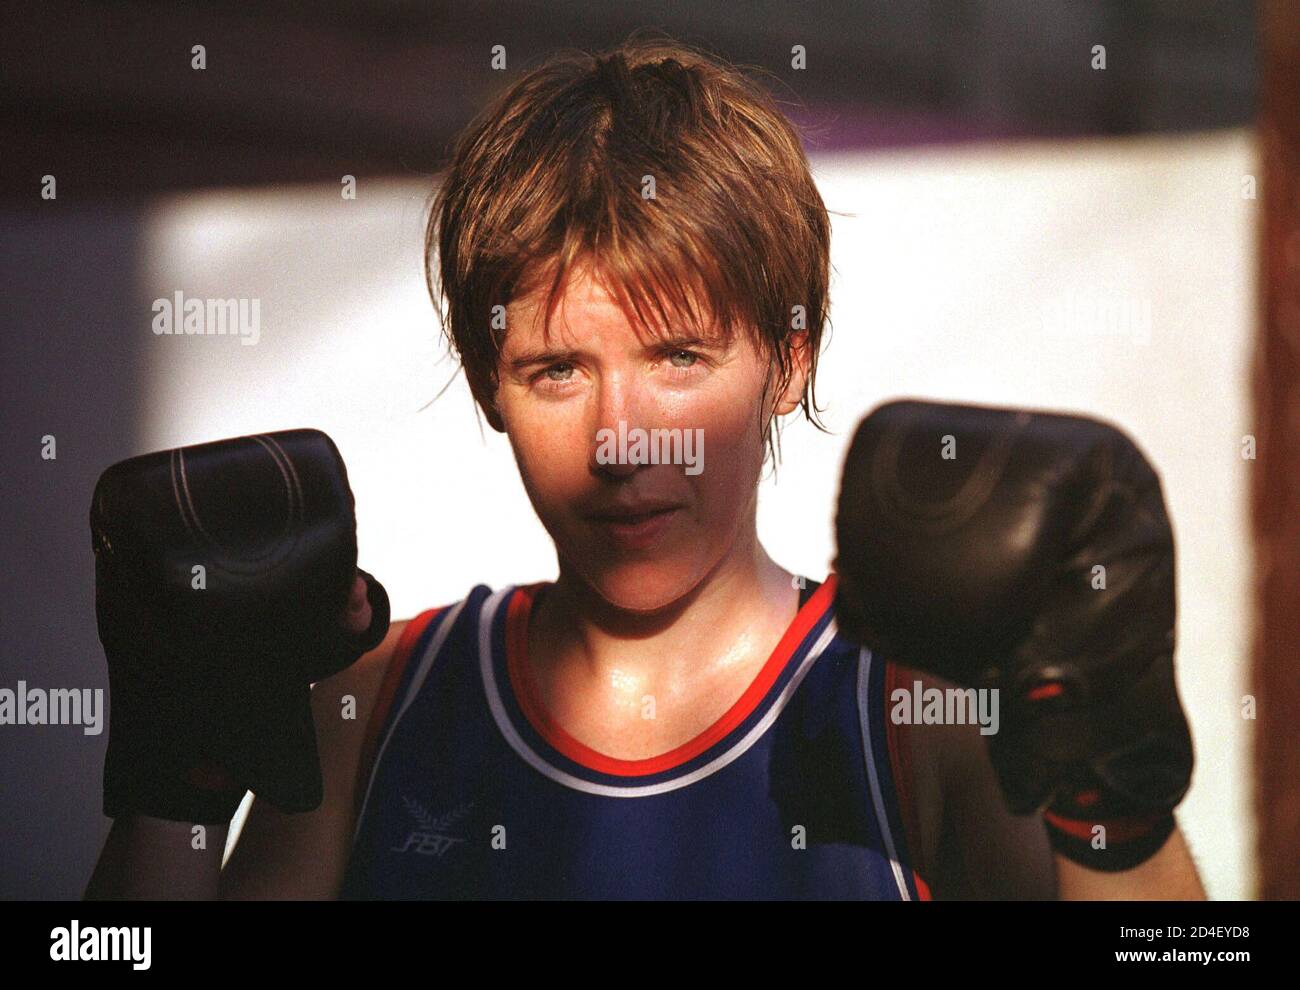 har en finger i kagen Clancy fusionere Irish Thai boxer Niamh Griffin strikes a pose during a workout at Bangkok's  Sor Vorapin Gym, April 12, 2002. Griffin, a former women's world Muay Thai  junior featherweight champion, has in five